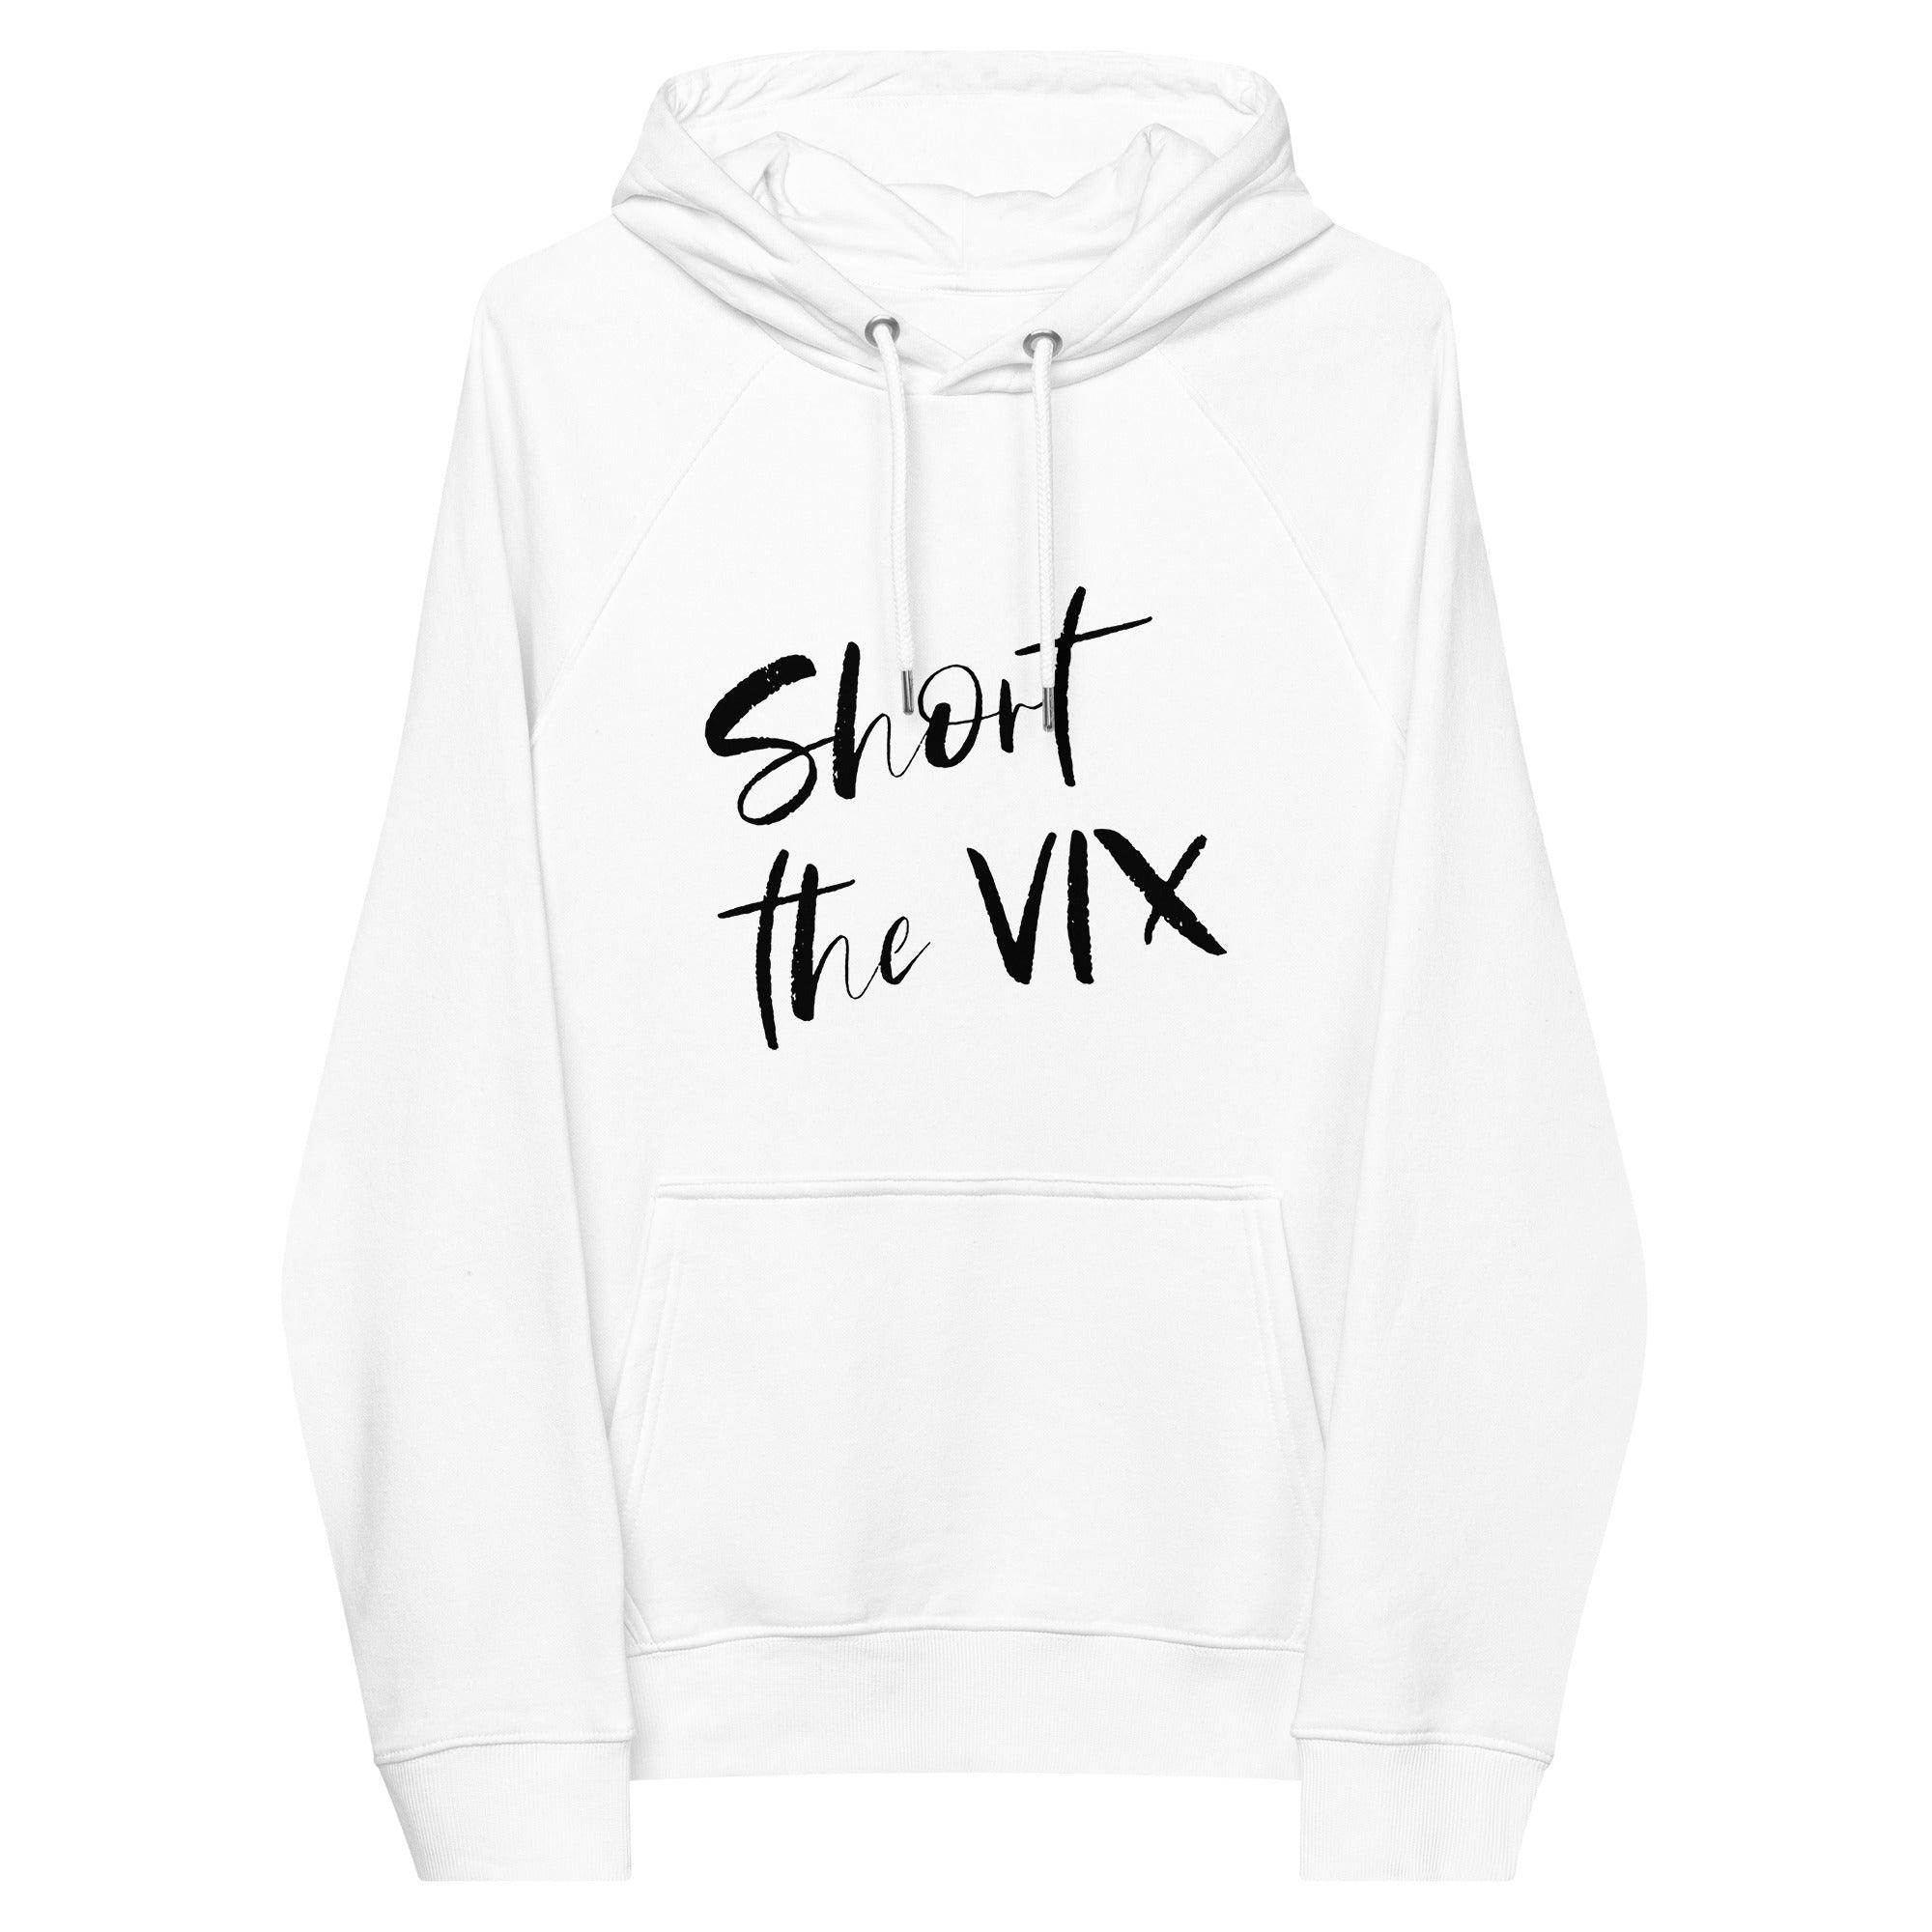 Short The VIX Pullover Hoodie - InvestmenTees